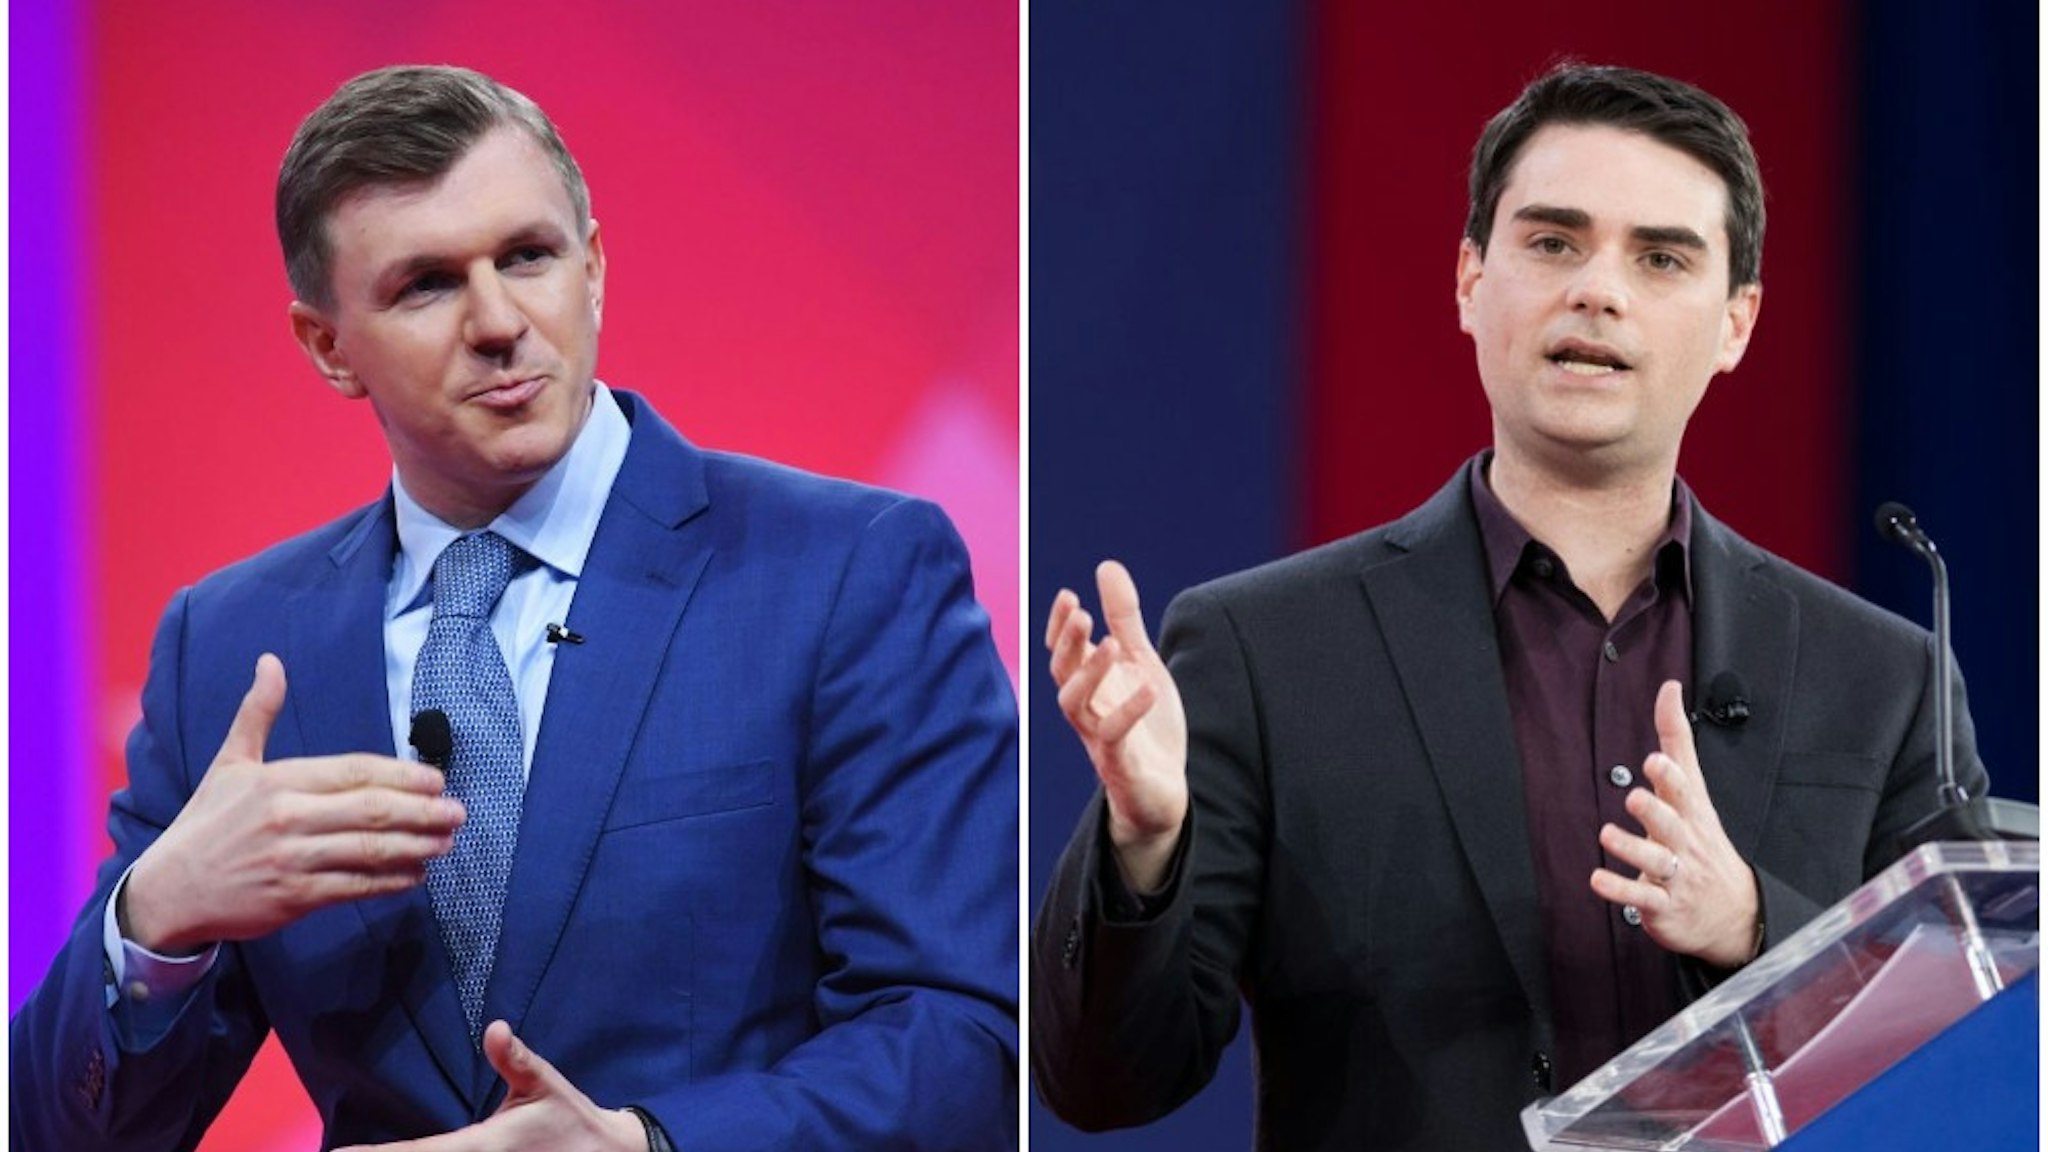 Photo of James O'Keefe by MANDEL NGAN/AFP via Getty Images / Photo of Ben Shapiro by Michael Brochstein/SOPA Images/LightRocket via Getty Images